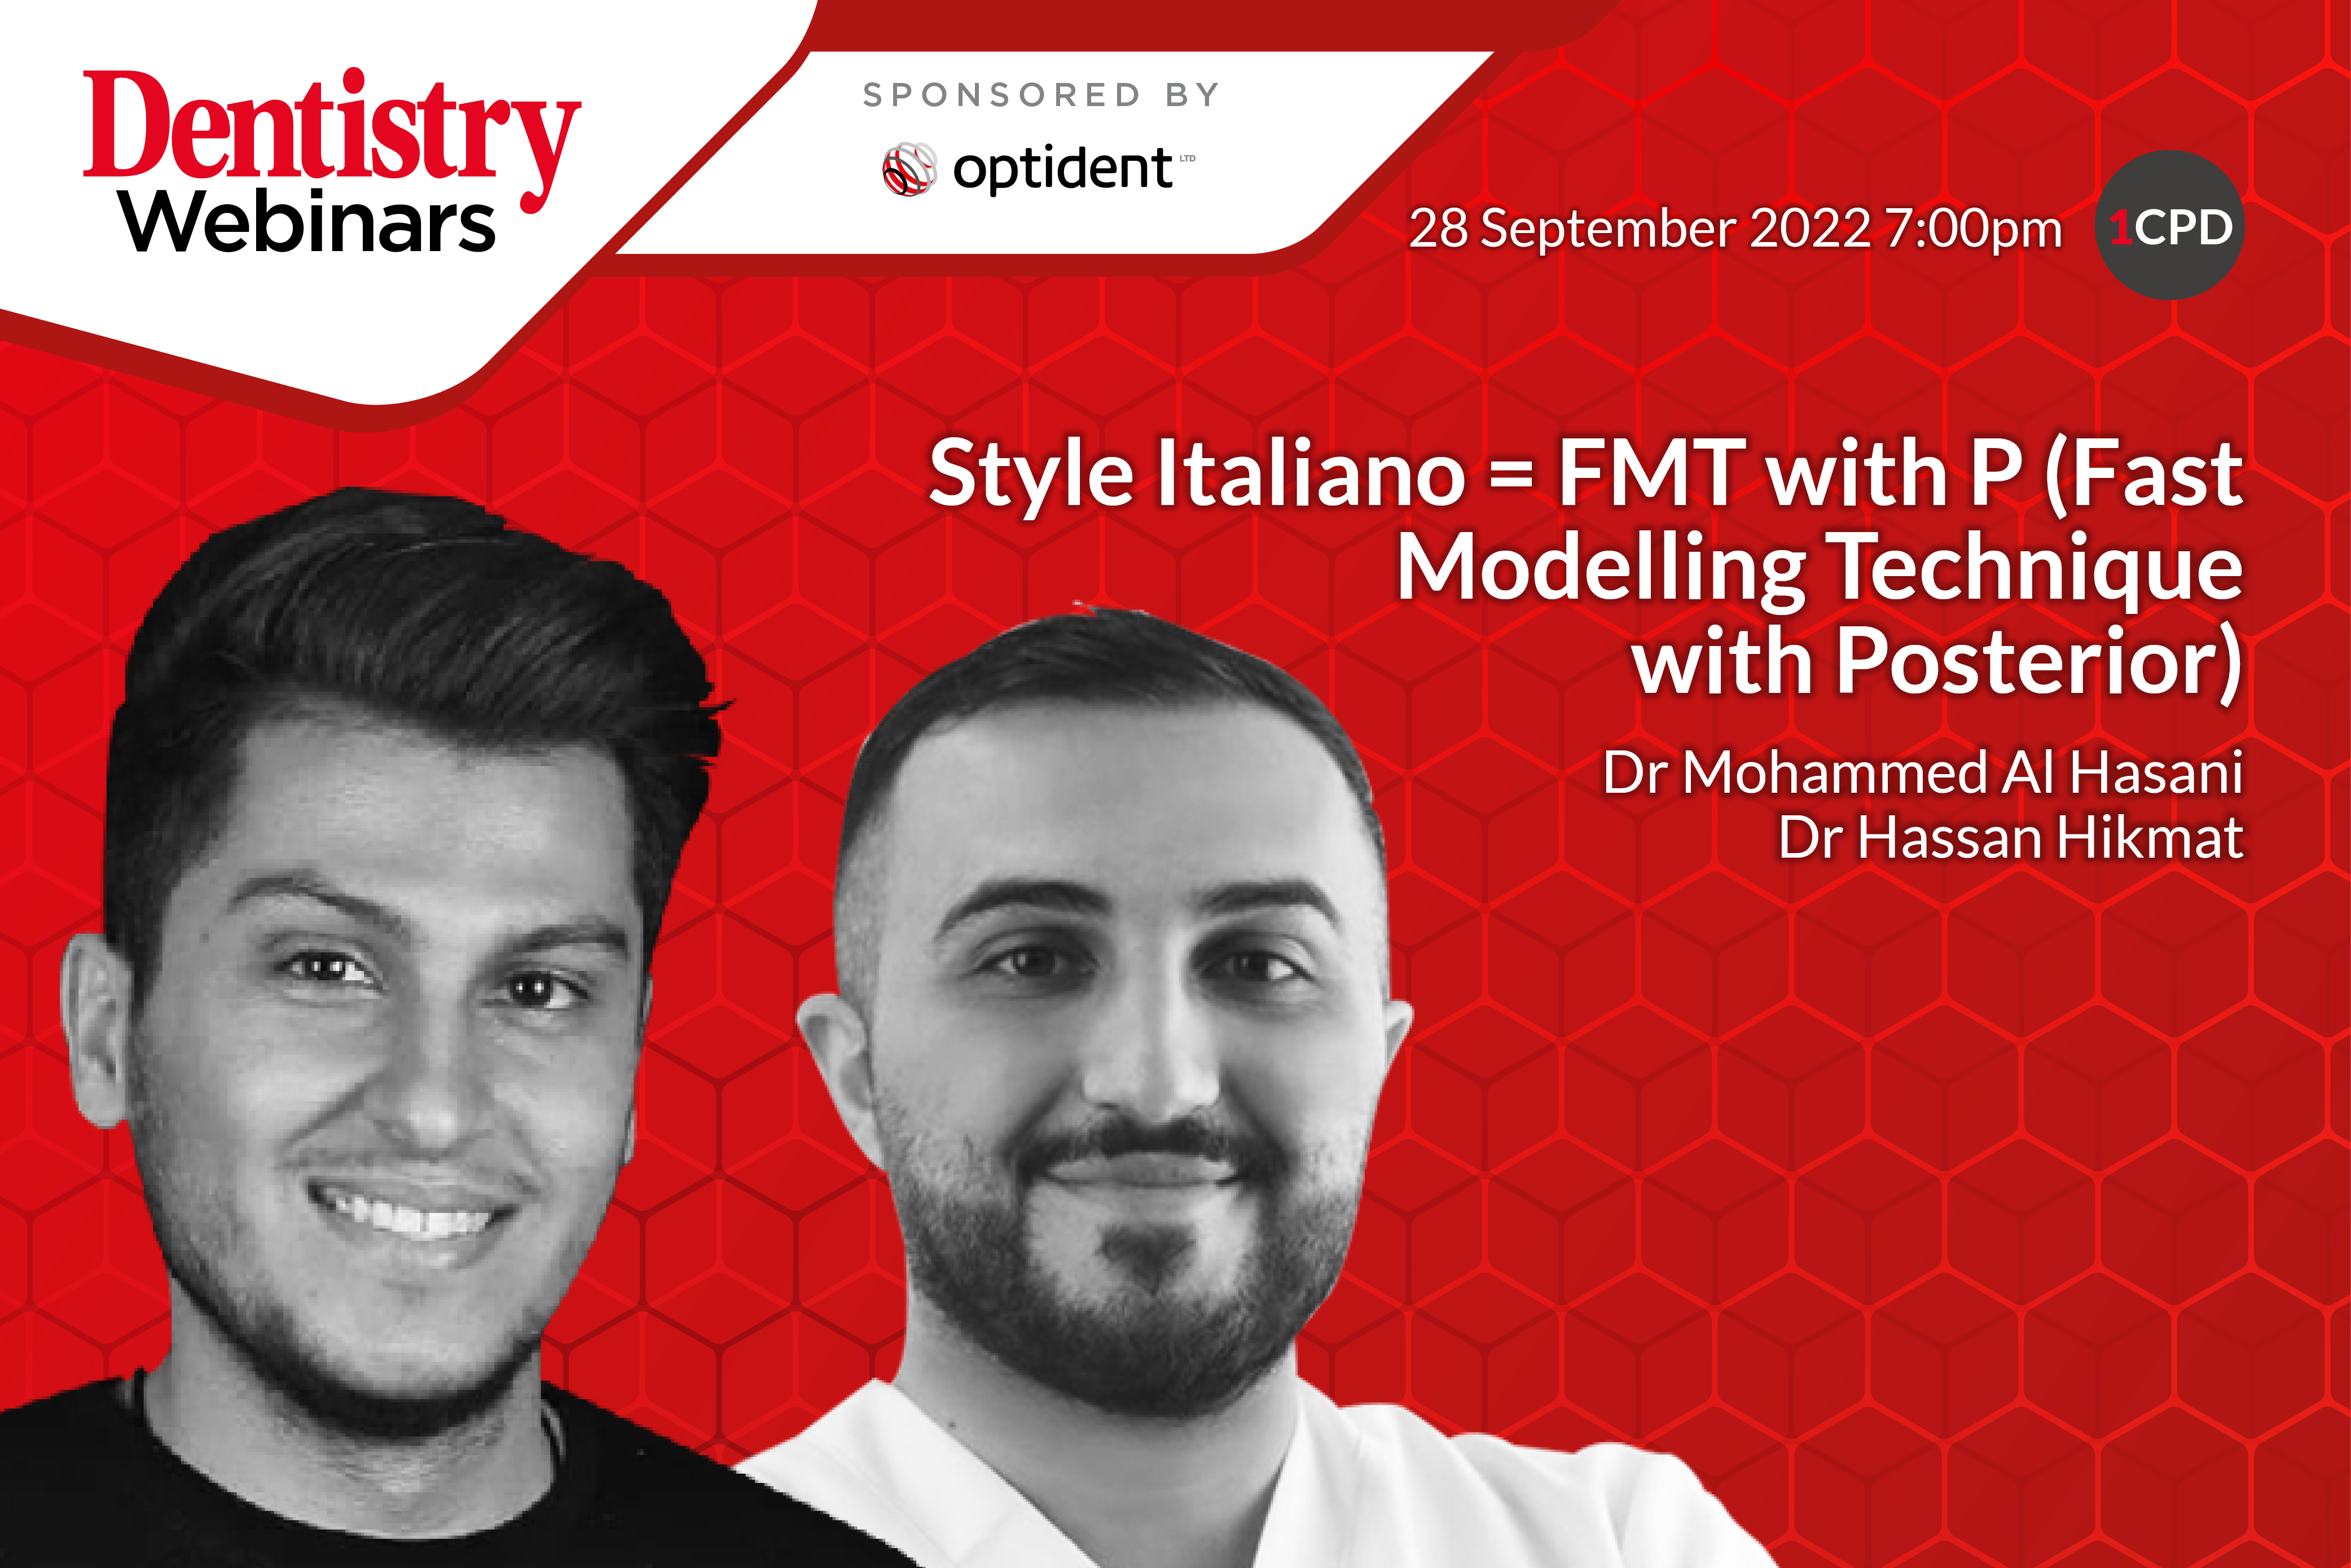 Join Drs Mohammed Al Hasani and Hassan Hikmat on Wednesday 28 September at 7pm as they discuss Style Italiano.